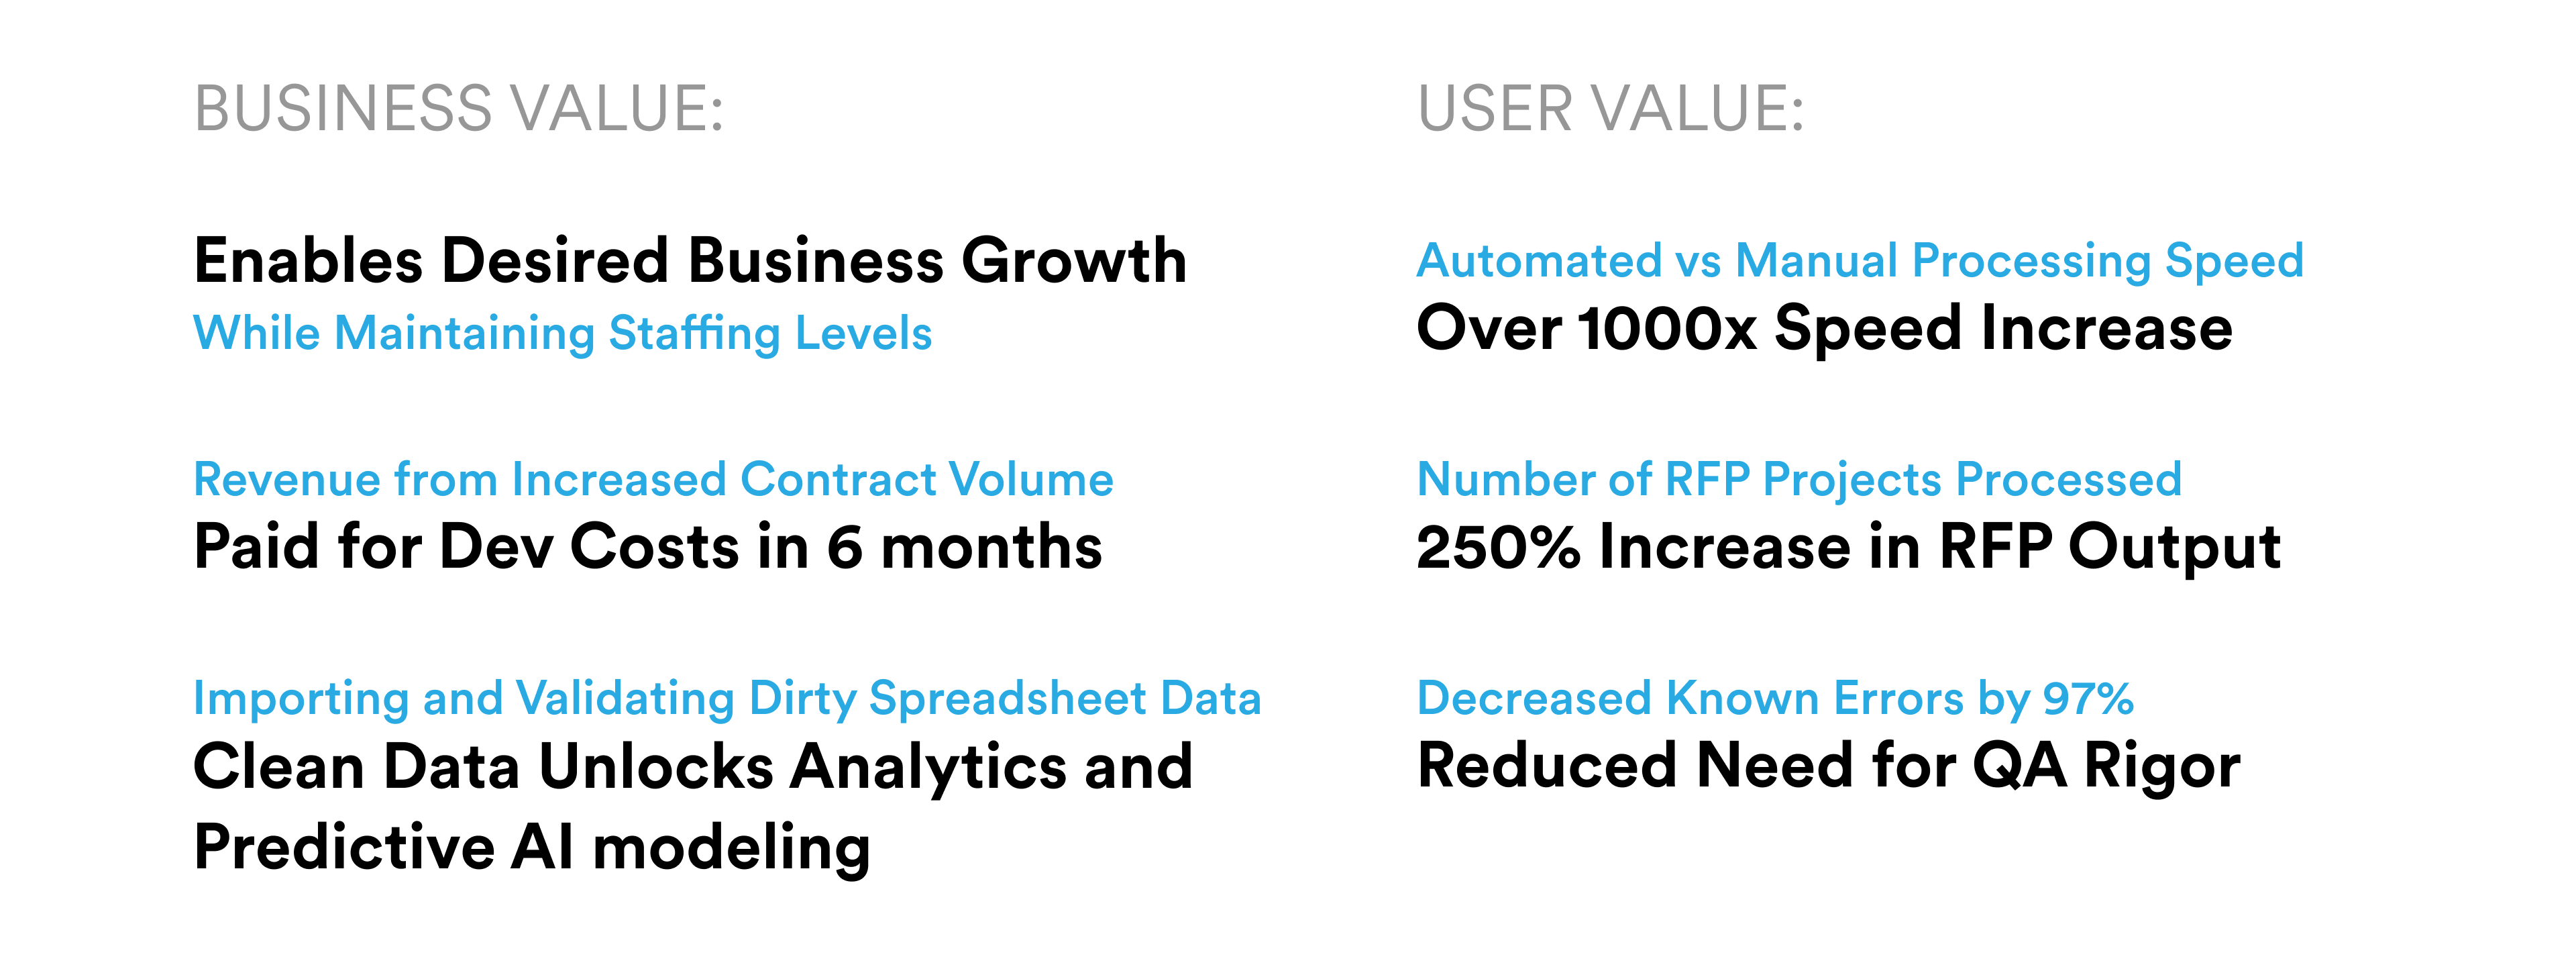 Bullet points of MVP 1 Values to Business and Users